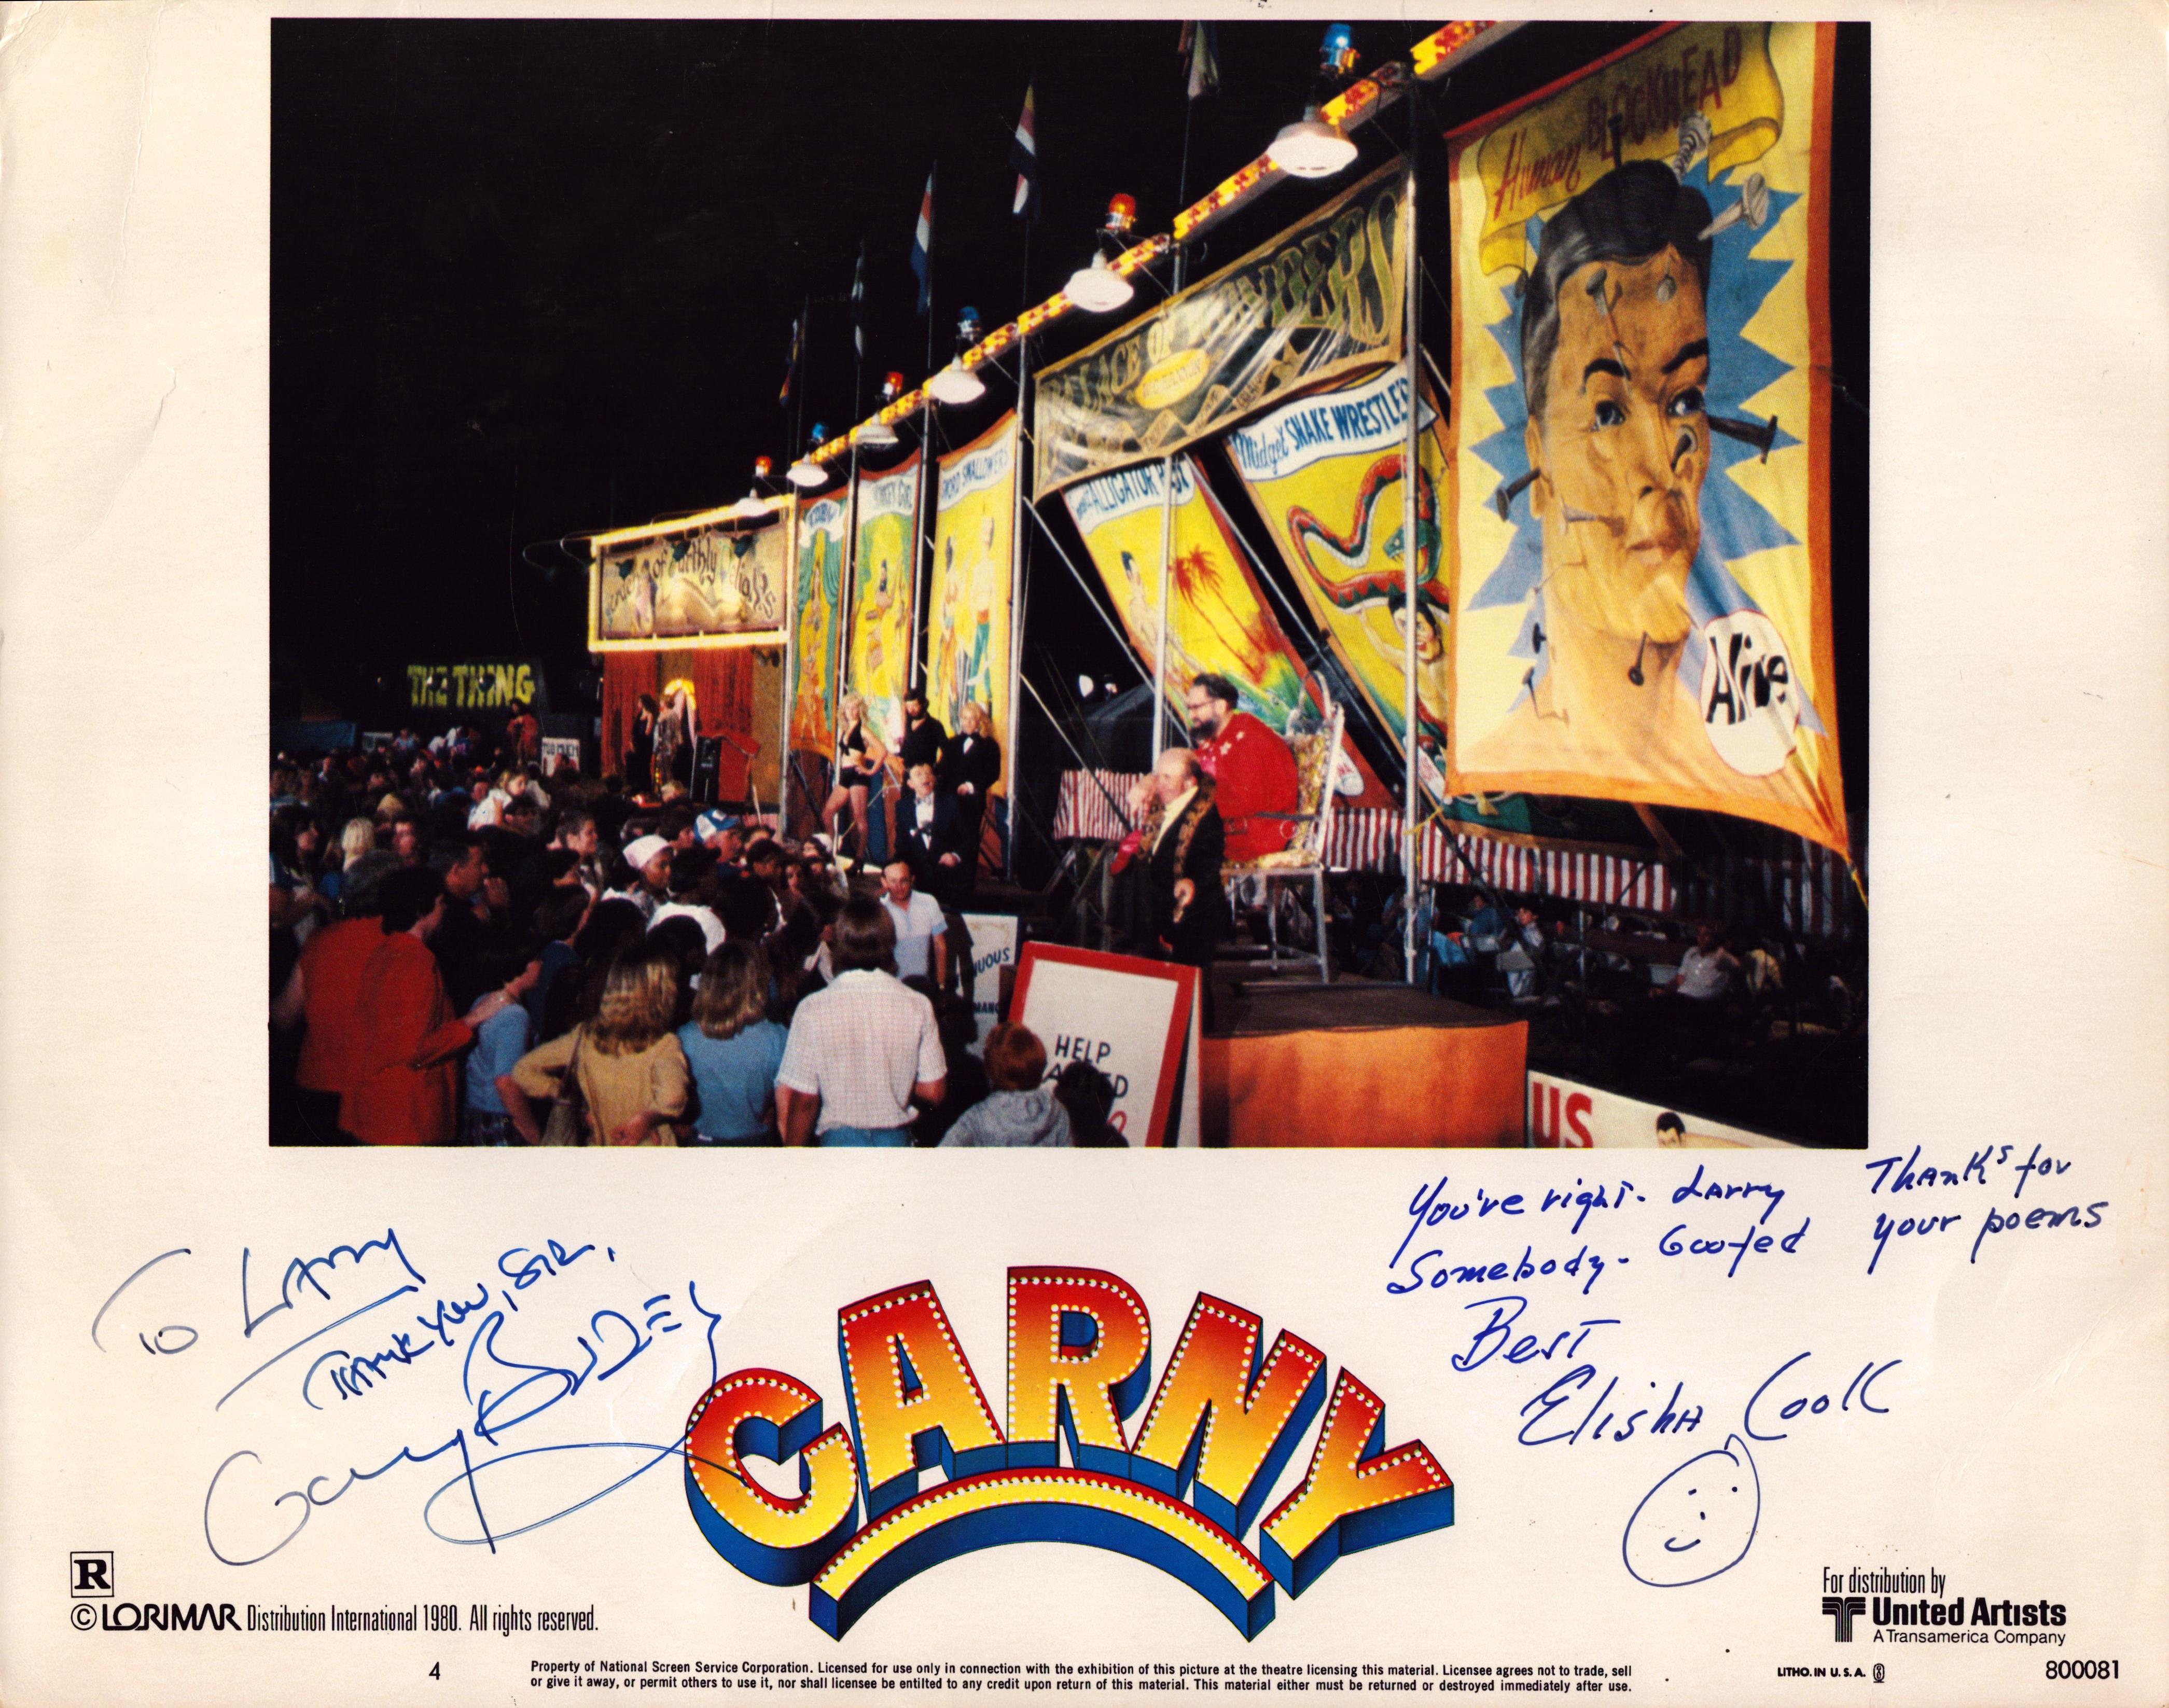 Gary Busey and Elisha Cook Jr signed Carny 14x11 inch vintage colour lobby card dedicated. Good